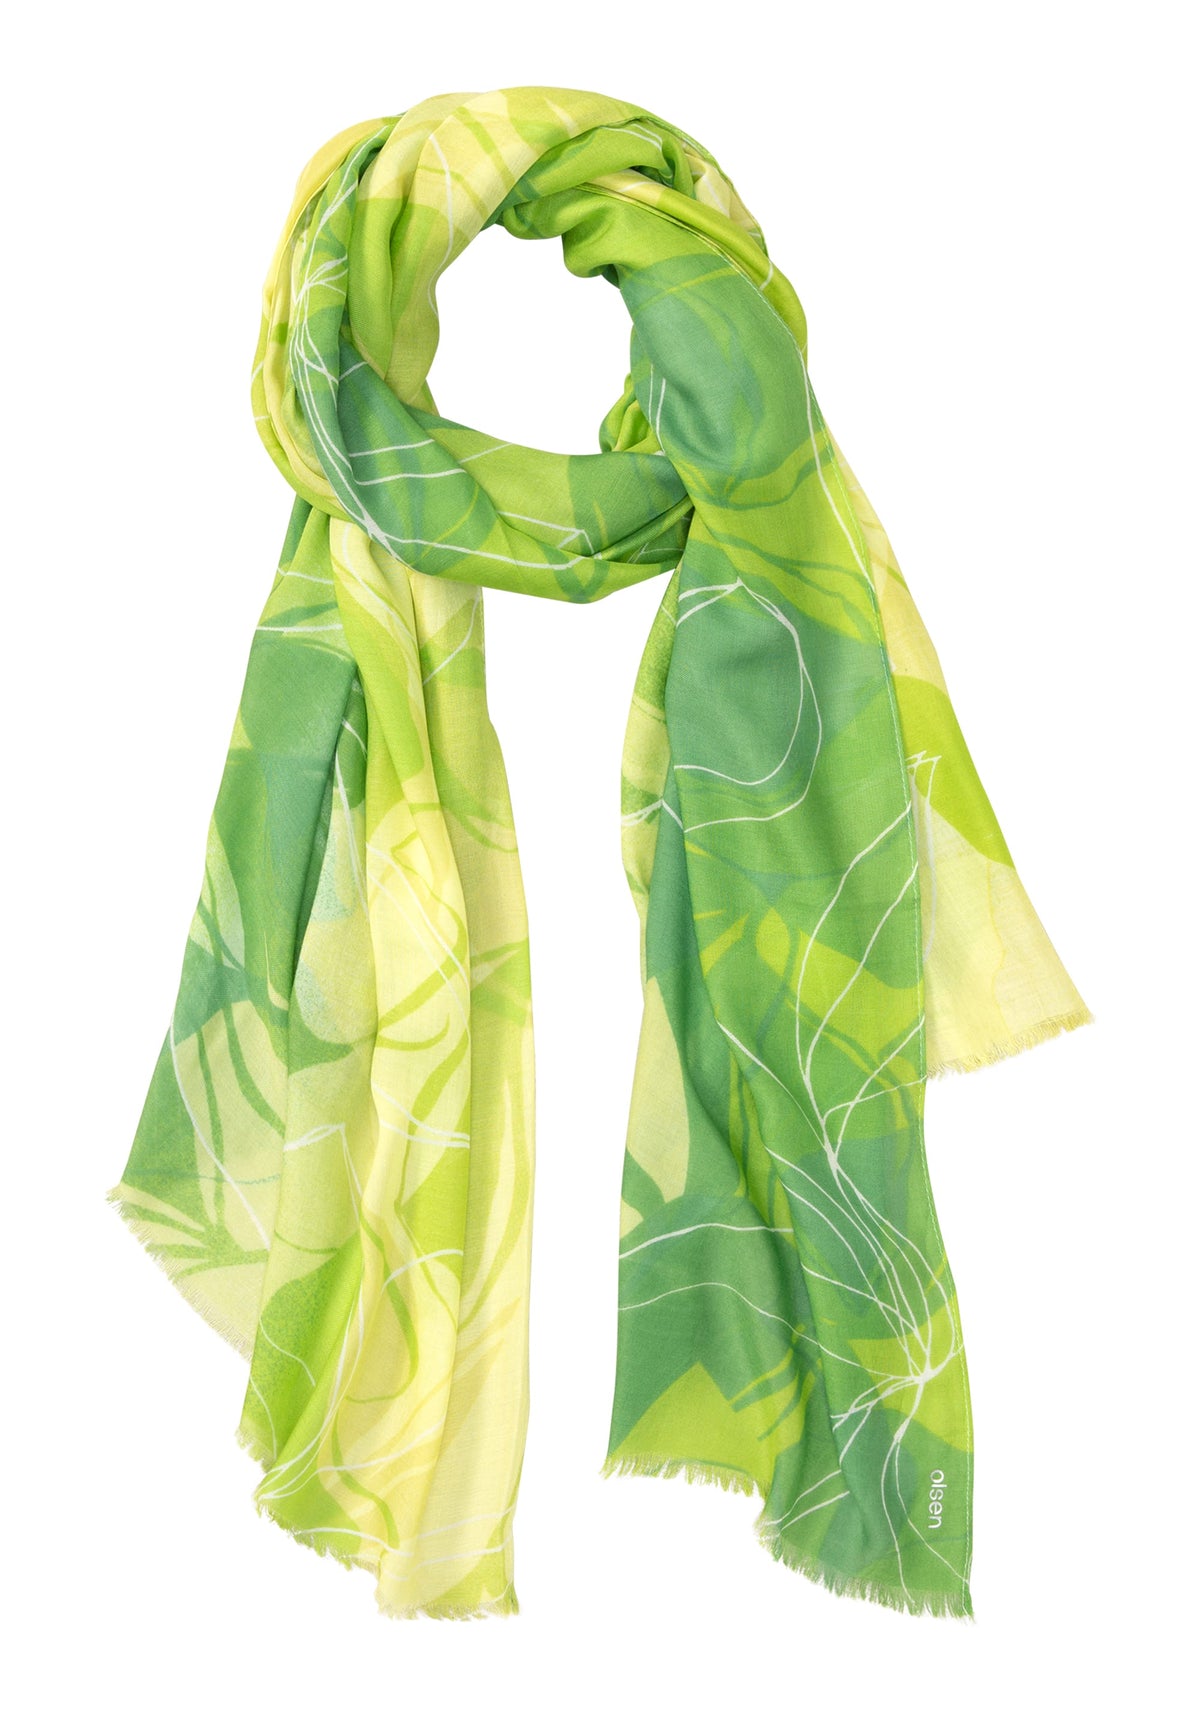 Allover Abstract Leave Pattern Scarf with Frayed Edge Trim